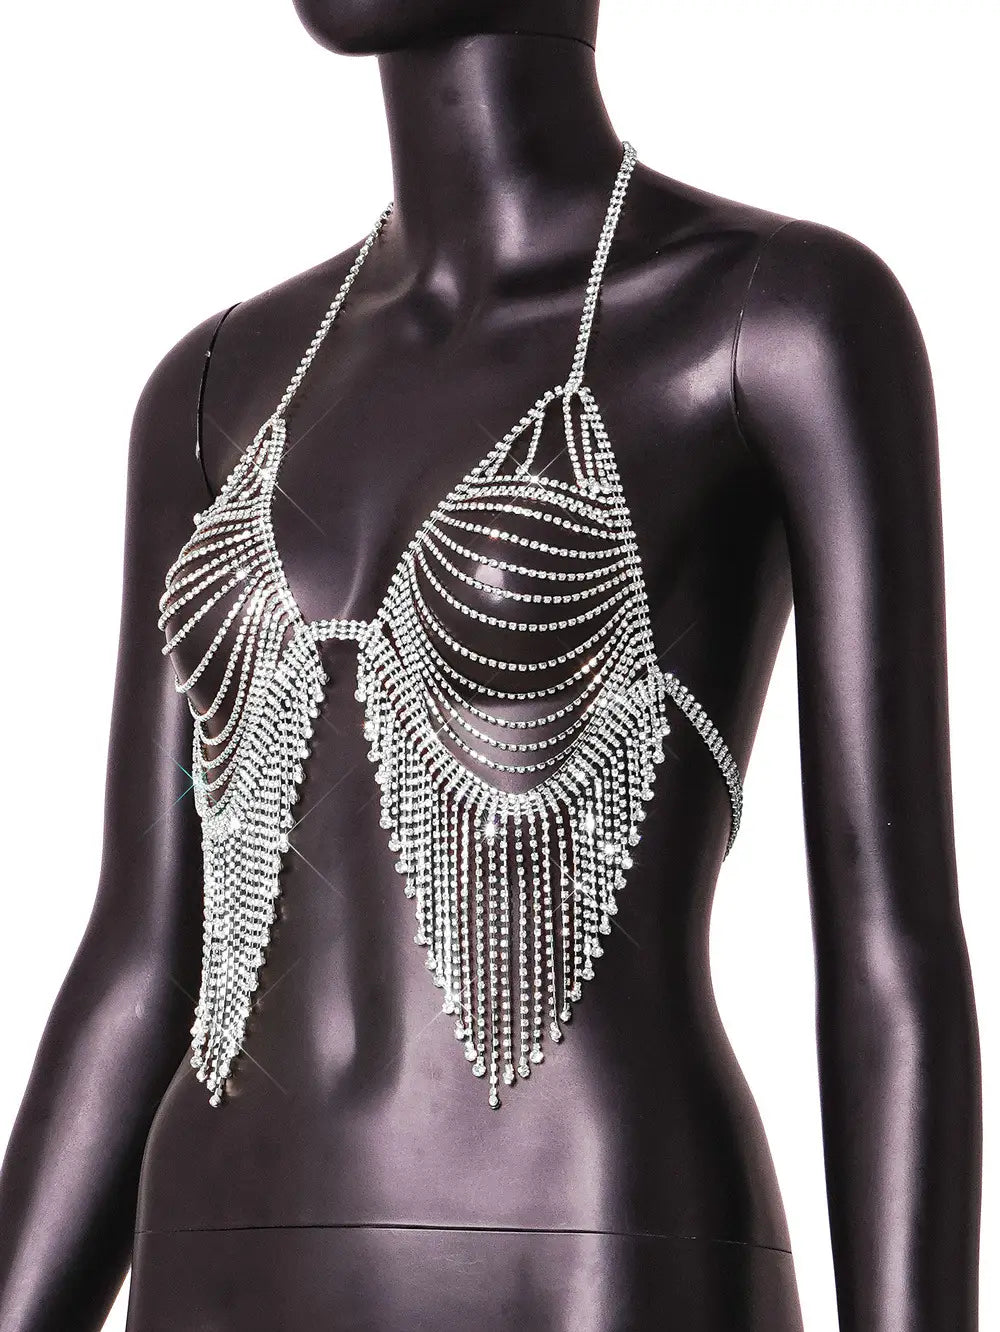 Sequin Halter Tank - Flaunt Your Glamour With a Dazzling Chest Chain